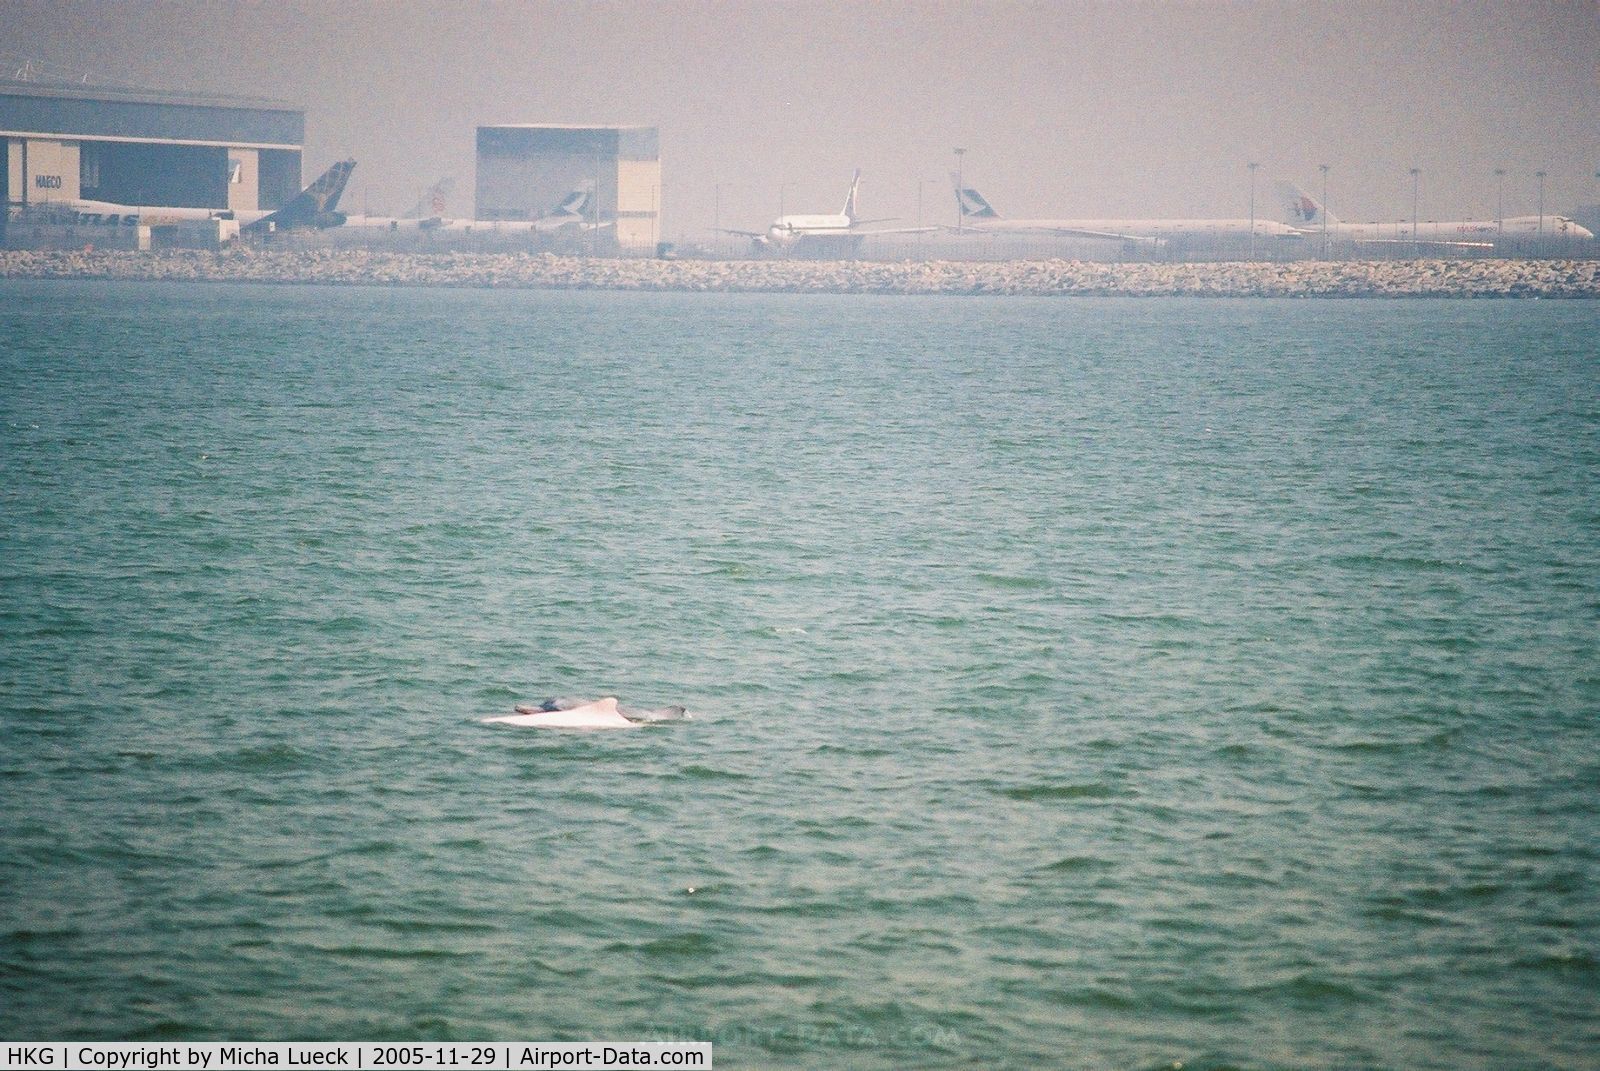 Hong Kong International Airport, Hong Kong Hong Kong (HKG) - The famous pink dolphins close to Hong Kong's new Chep Lap Kok Airport. The reclamation of land for the airport destroyed a large part of the endangered dolphins' habitat